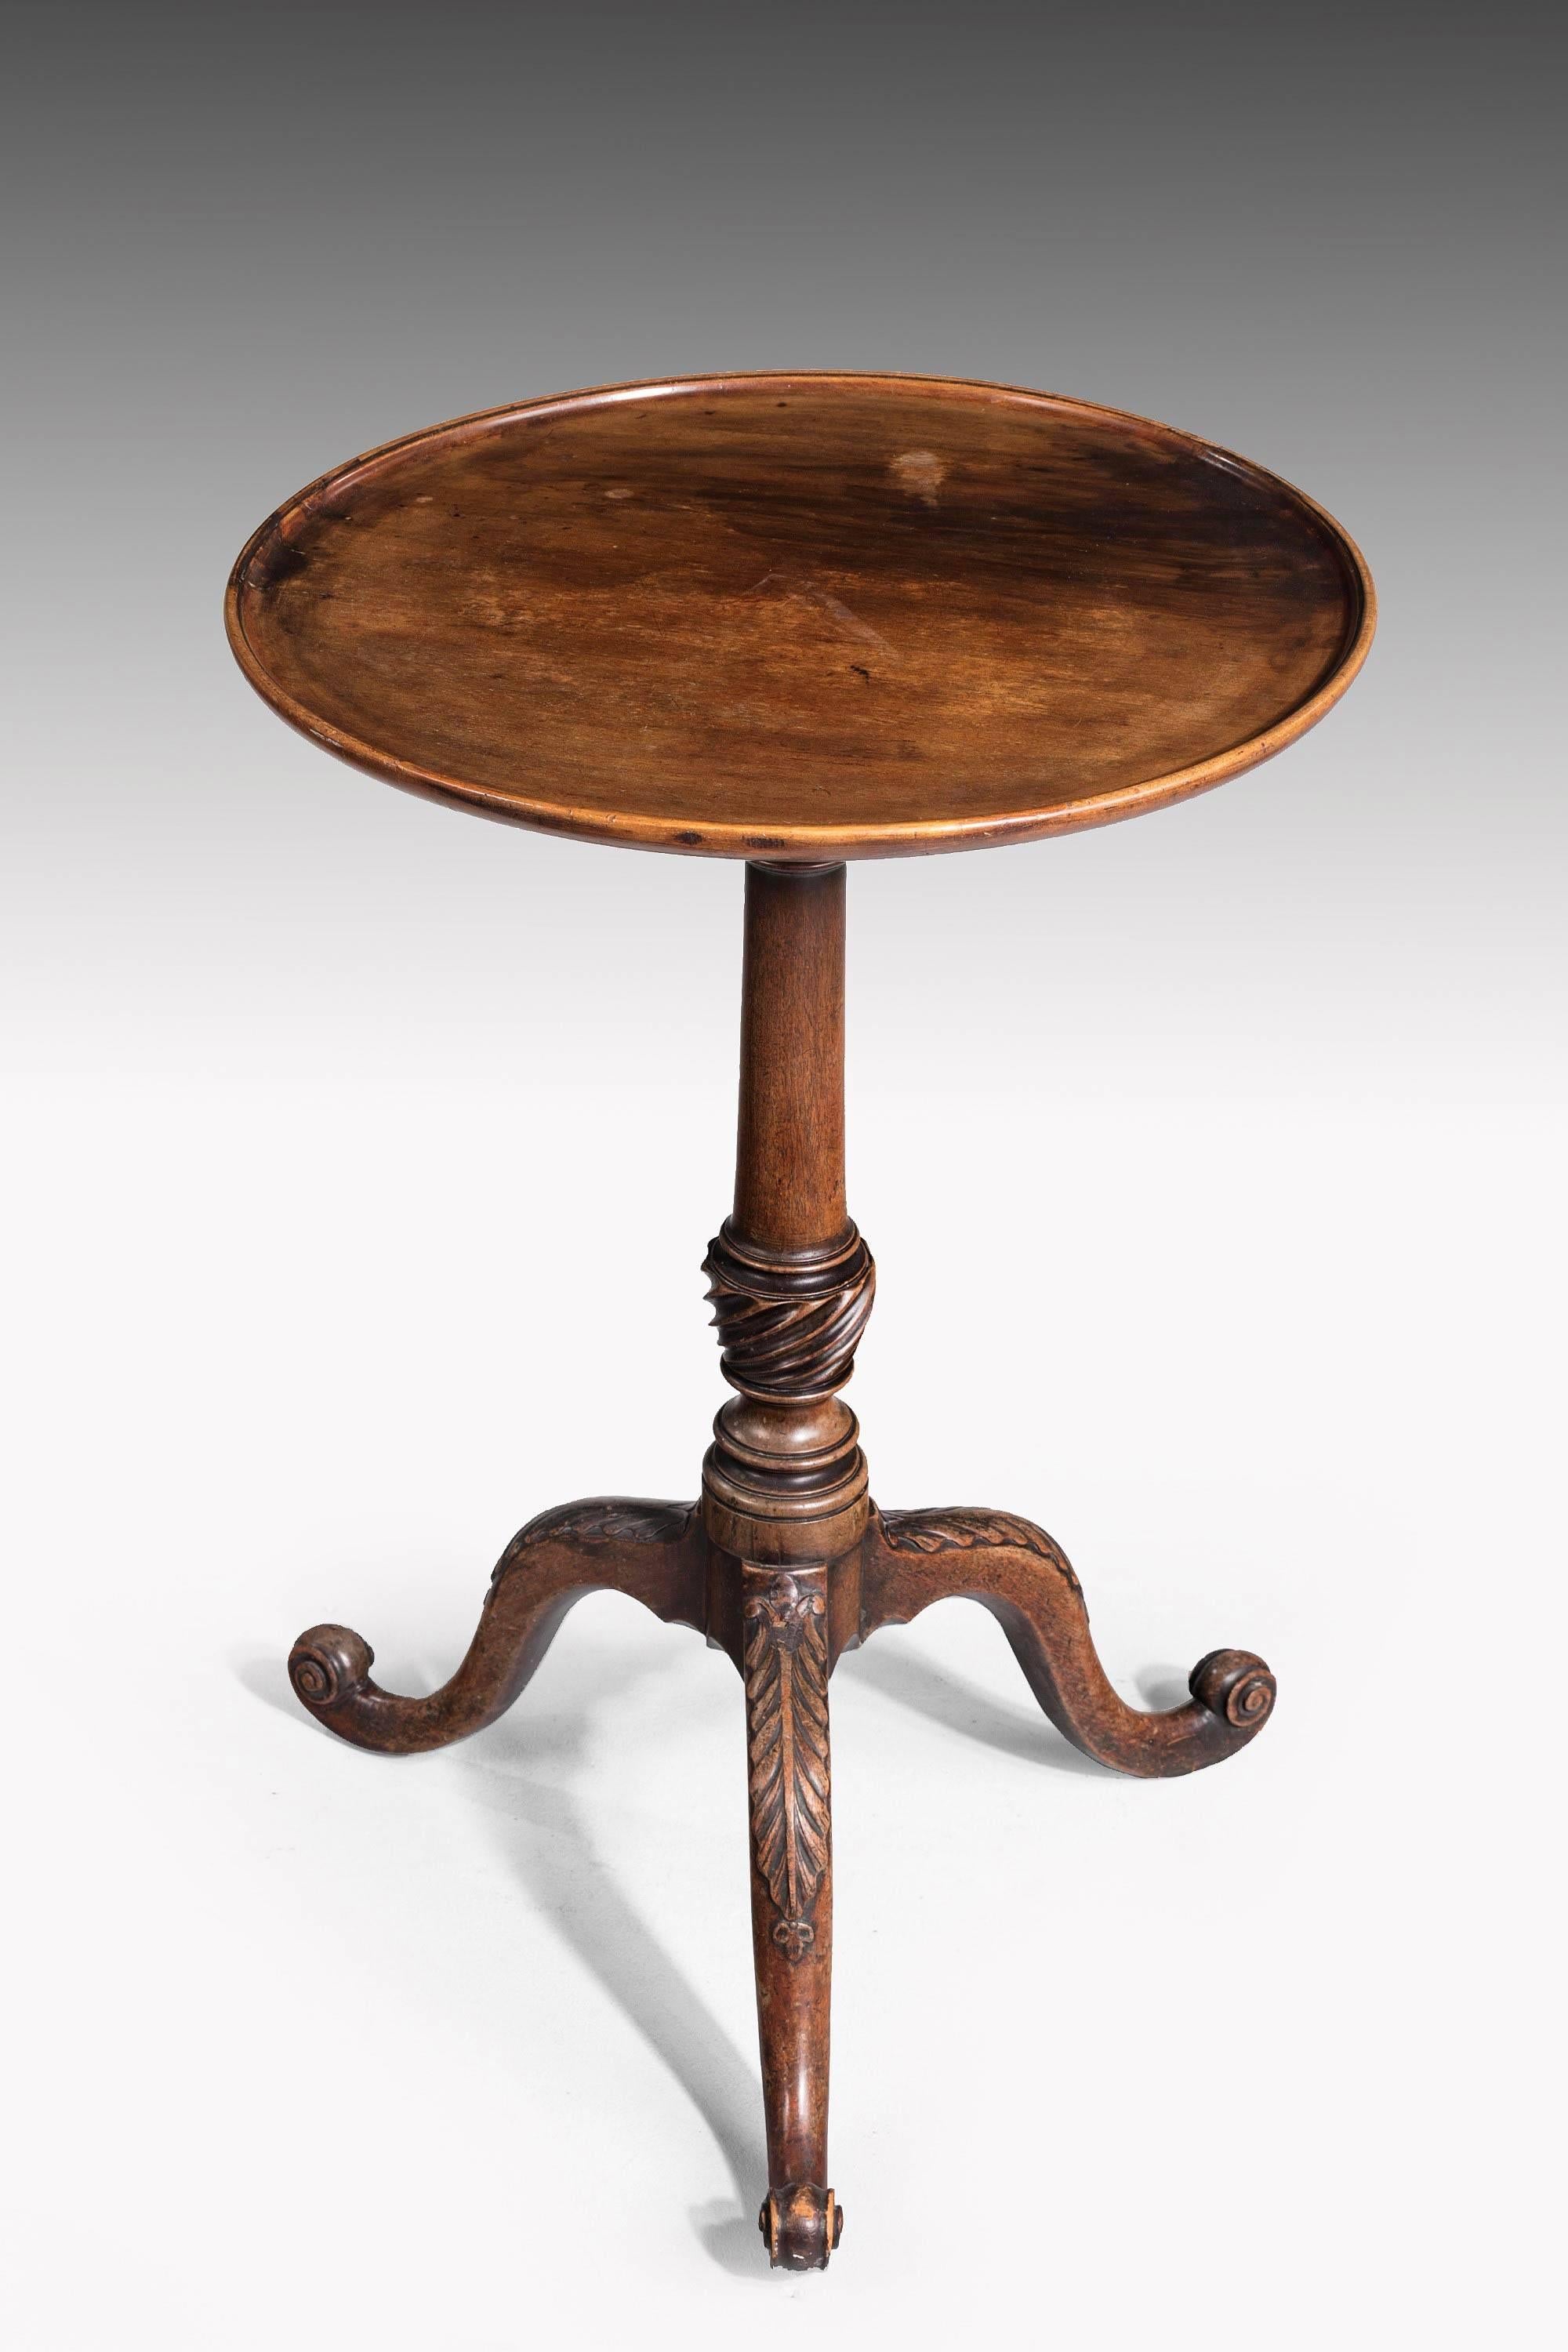 George III period mahogany dish top tripod table with well carved Stand, on scrolled toes. Wonderful color.